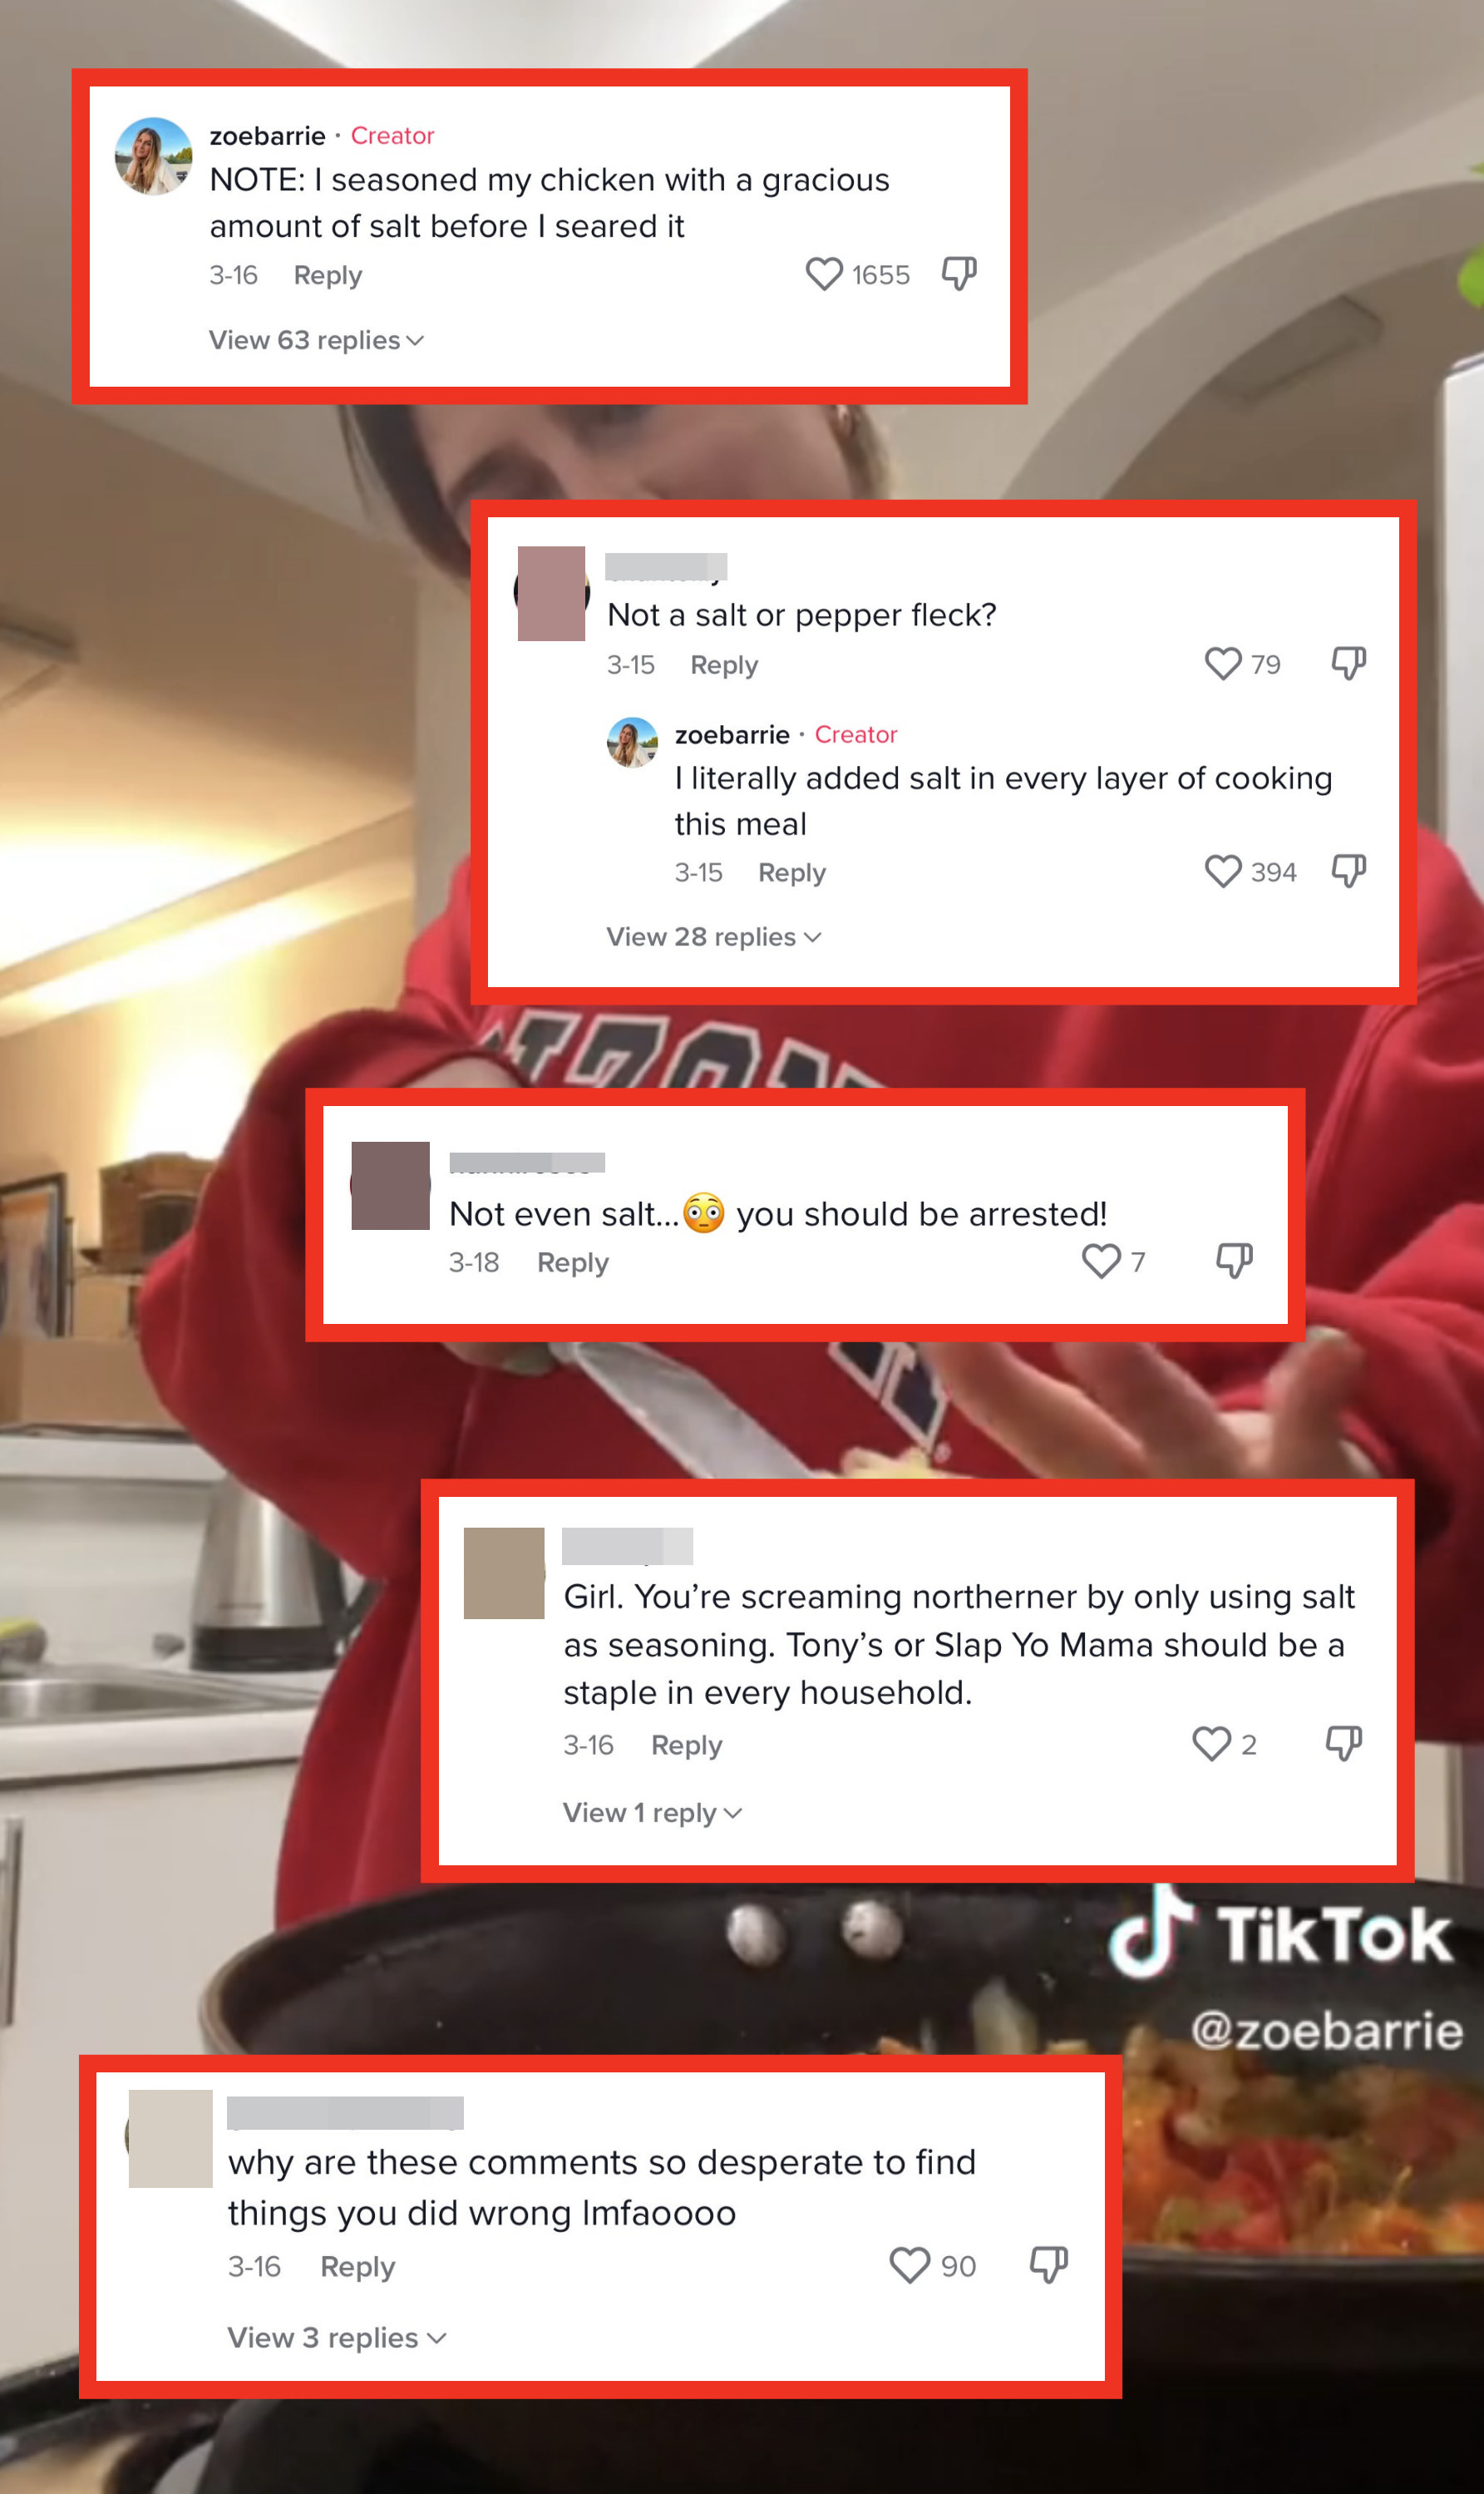 Various comments on the TikTok, like, &quot;You&#x27;re screaming northerner by only using salt as seasoning,&quot; and &quot;Not even salt? You should be arrested!&quot;